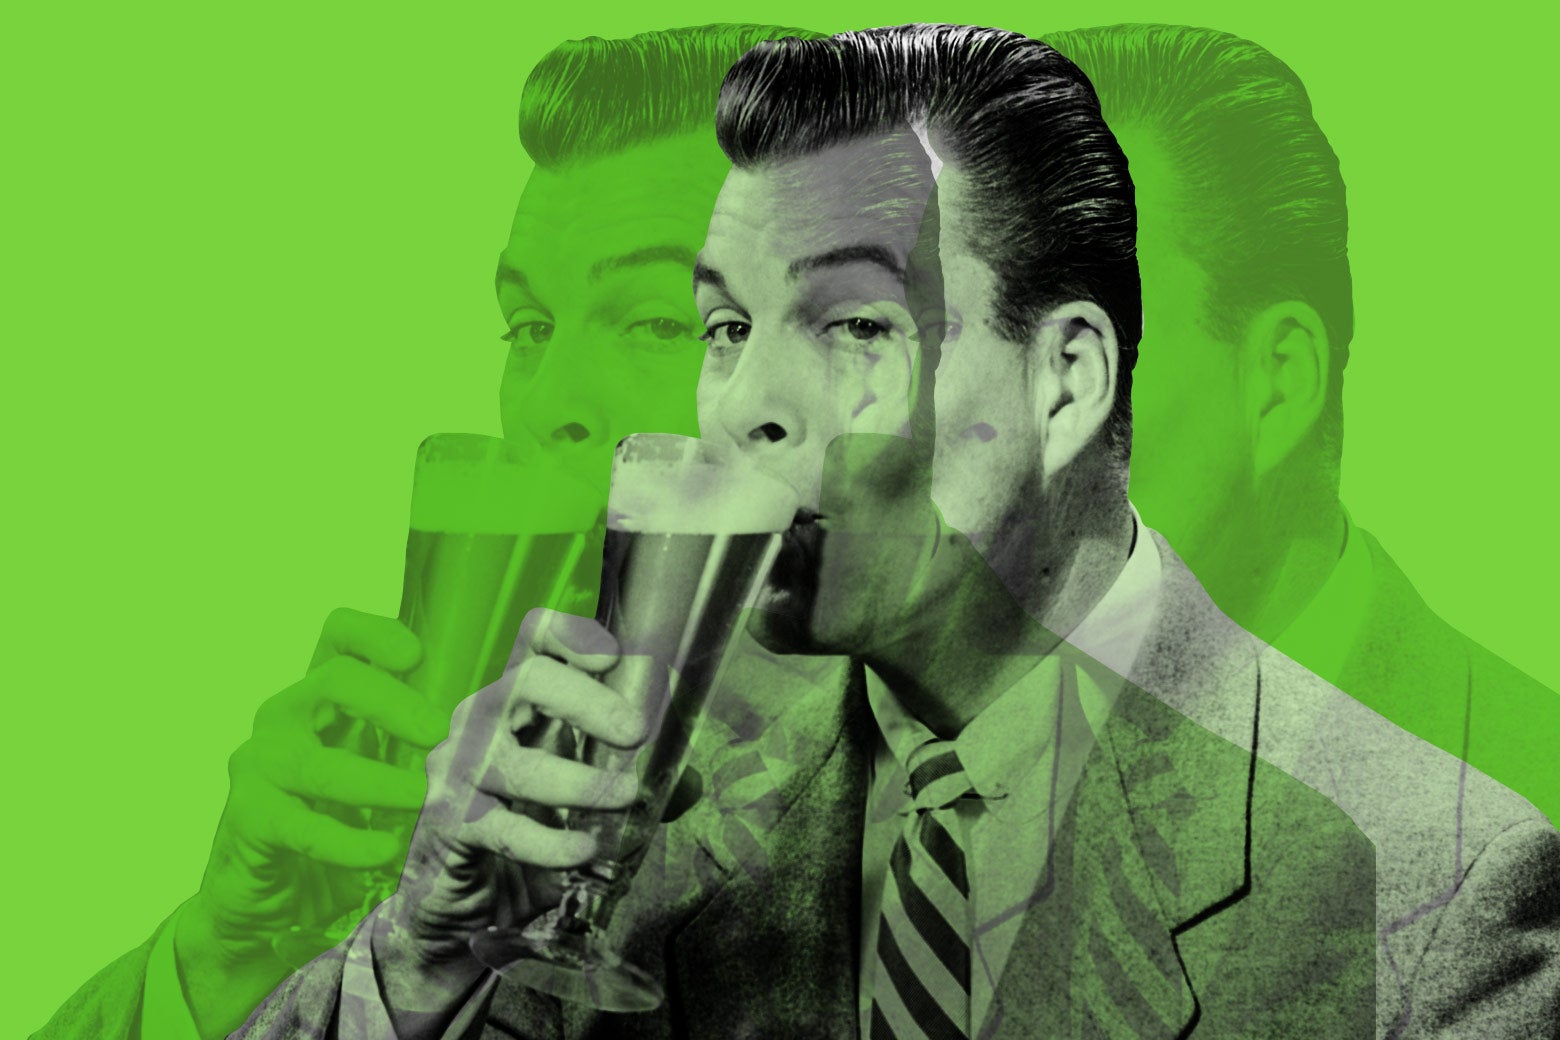 A man drinks a beer.